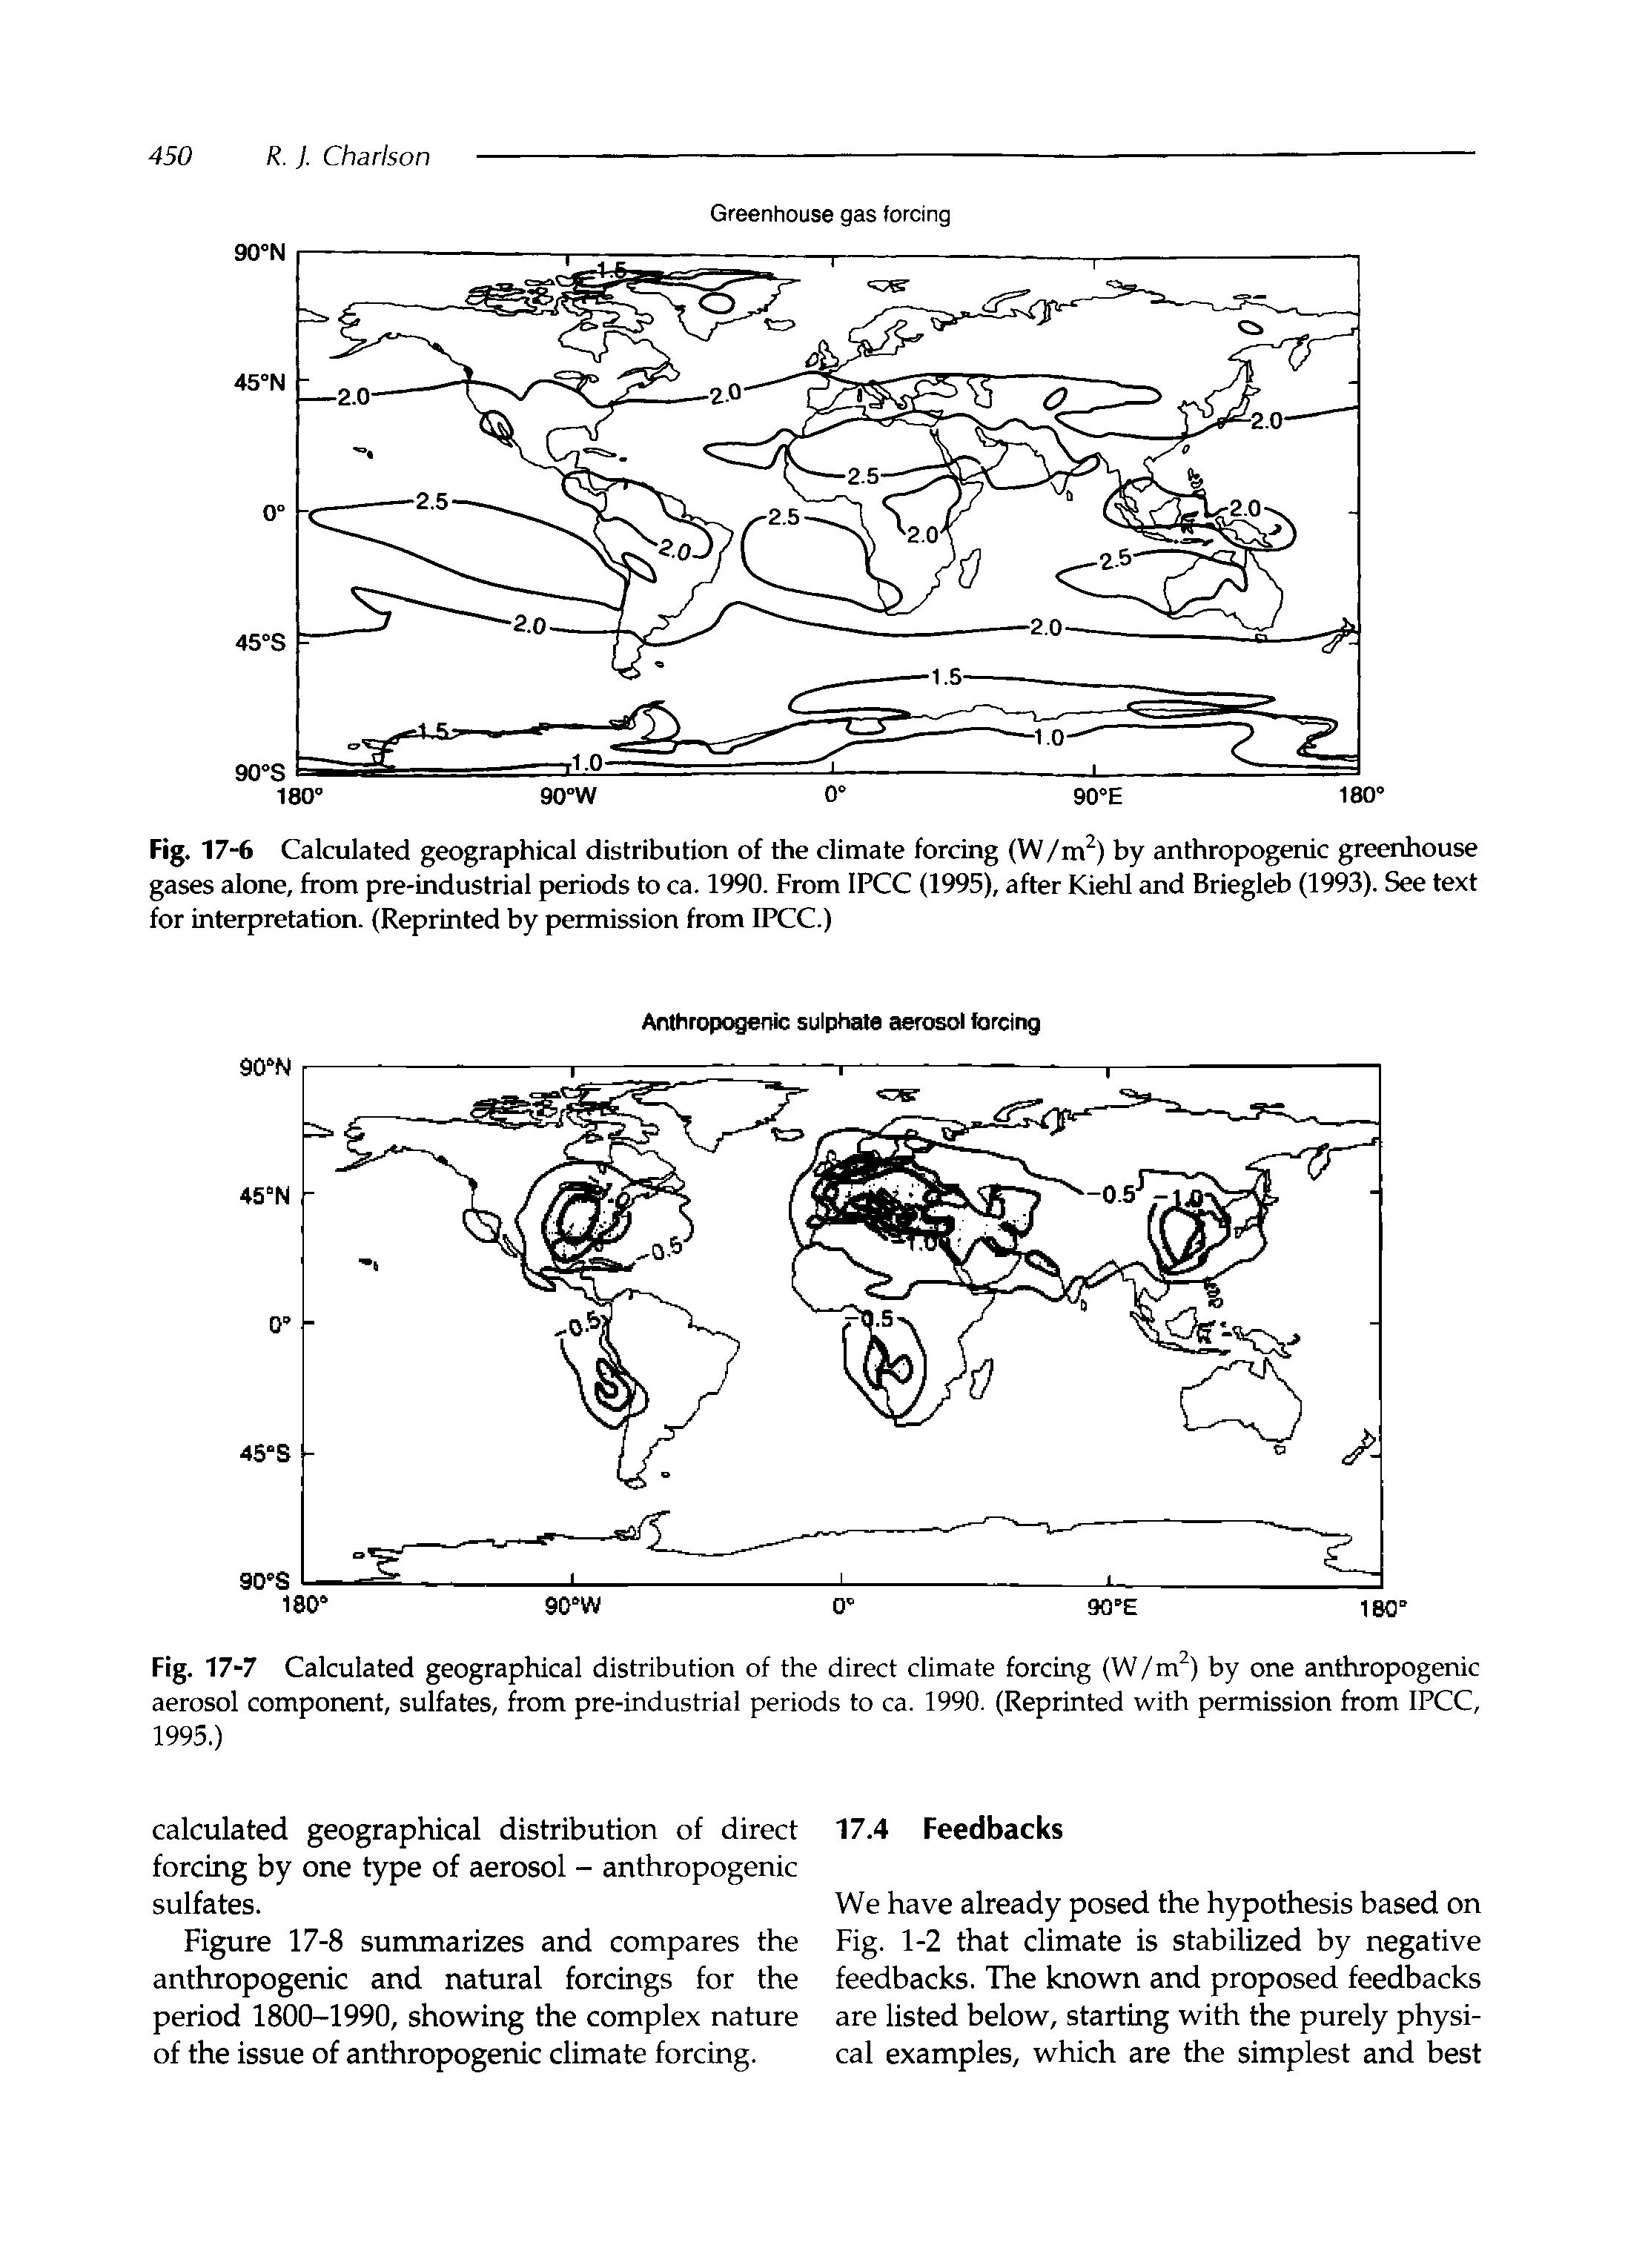 Fig. 17-7 Calculated geographical distribution of the direct climate forcing (W/m ) by one anthropogenic aerosol component, sulfates, from pre-industrial periods to ca. 1990. (Reprinted with permission from IPCC, 1995.)...